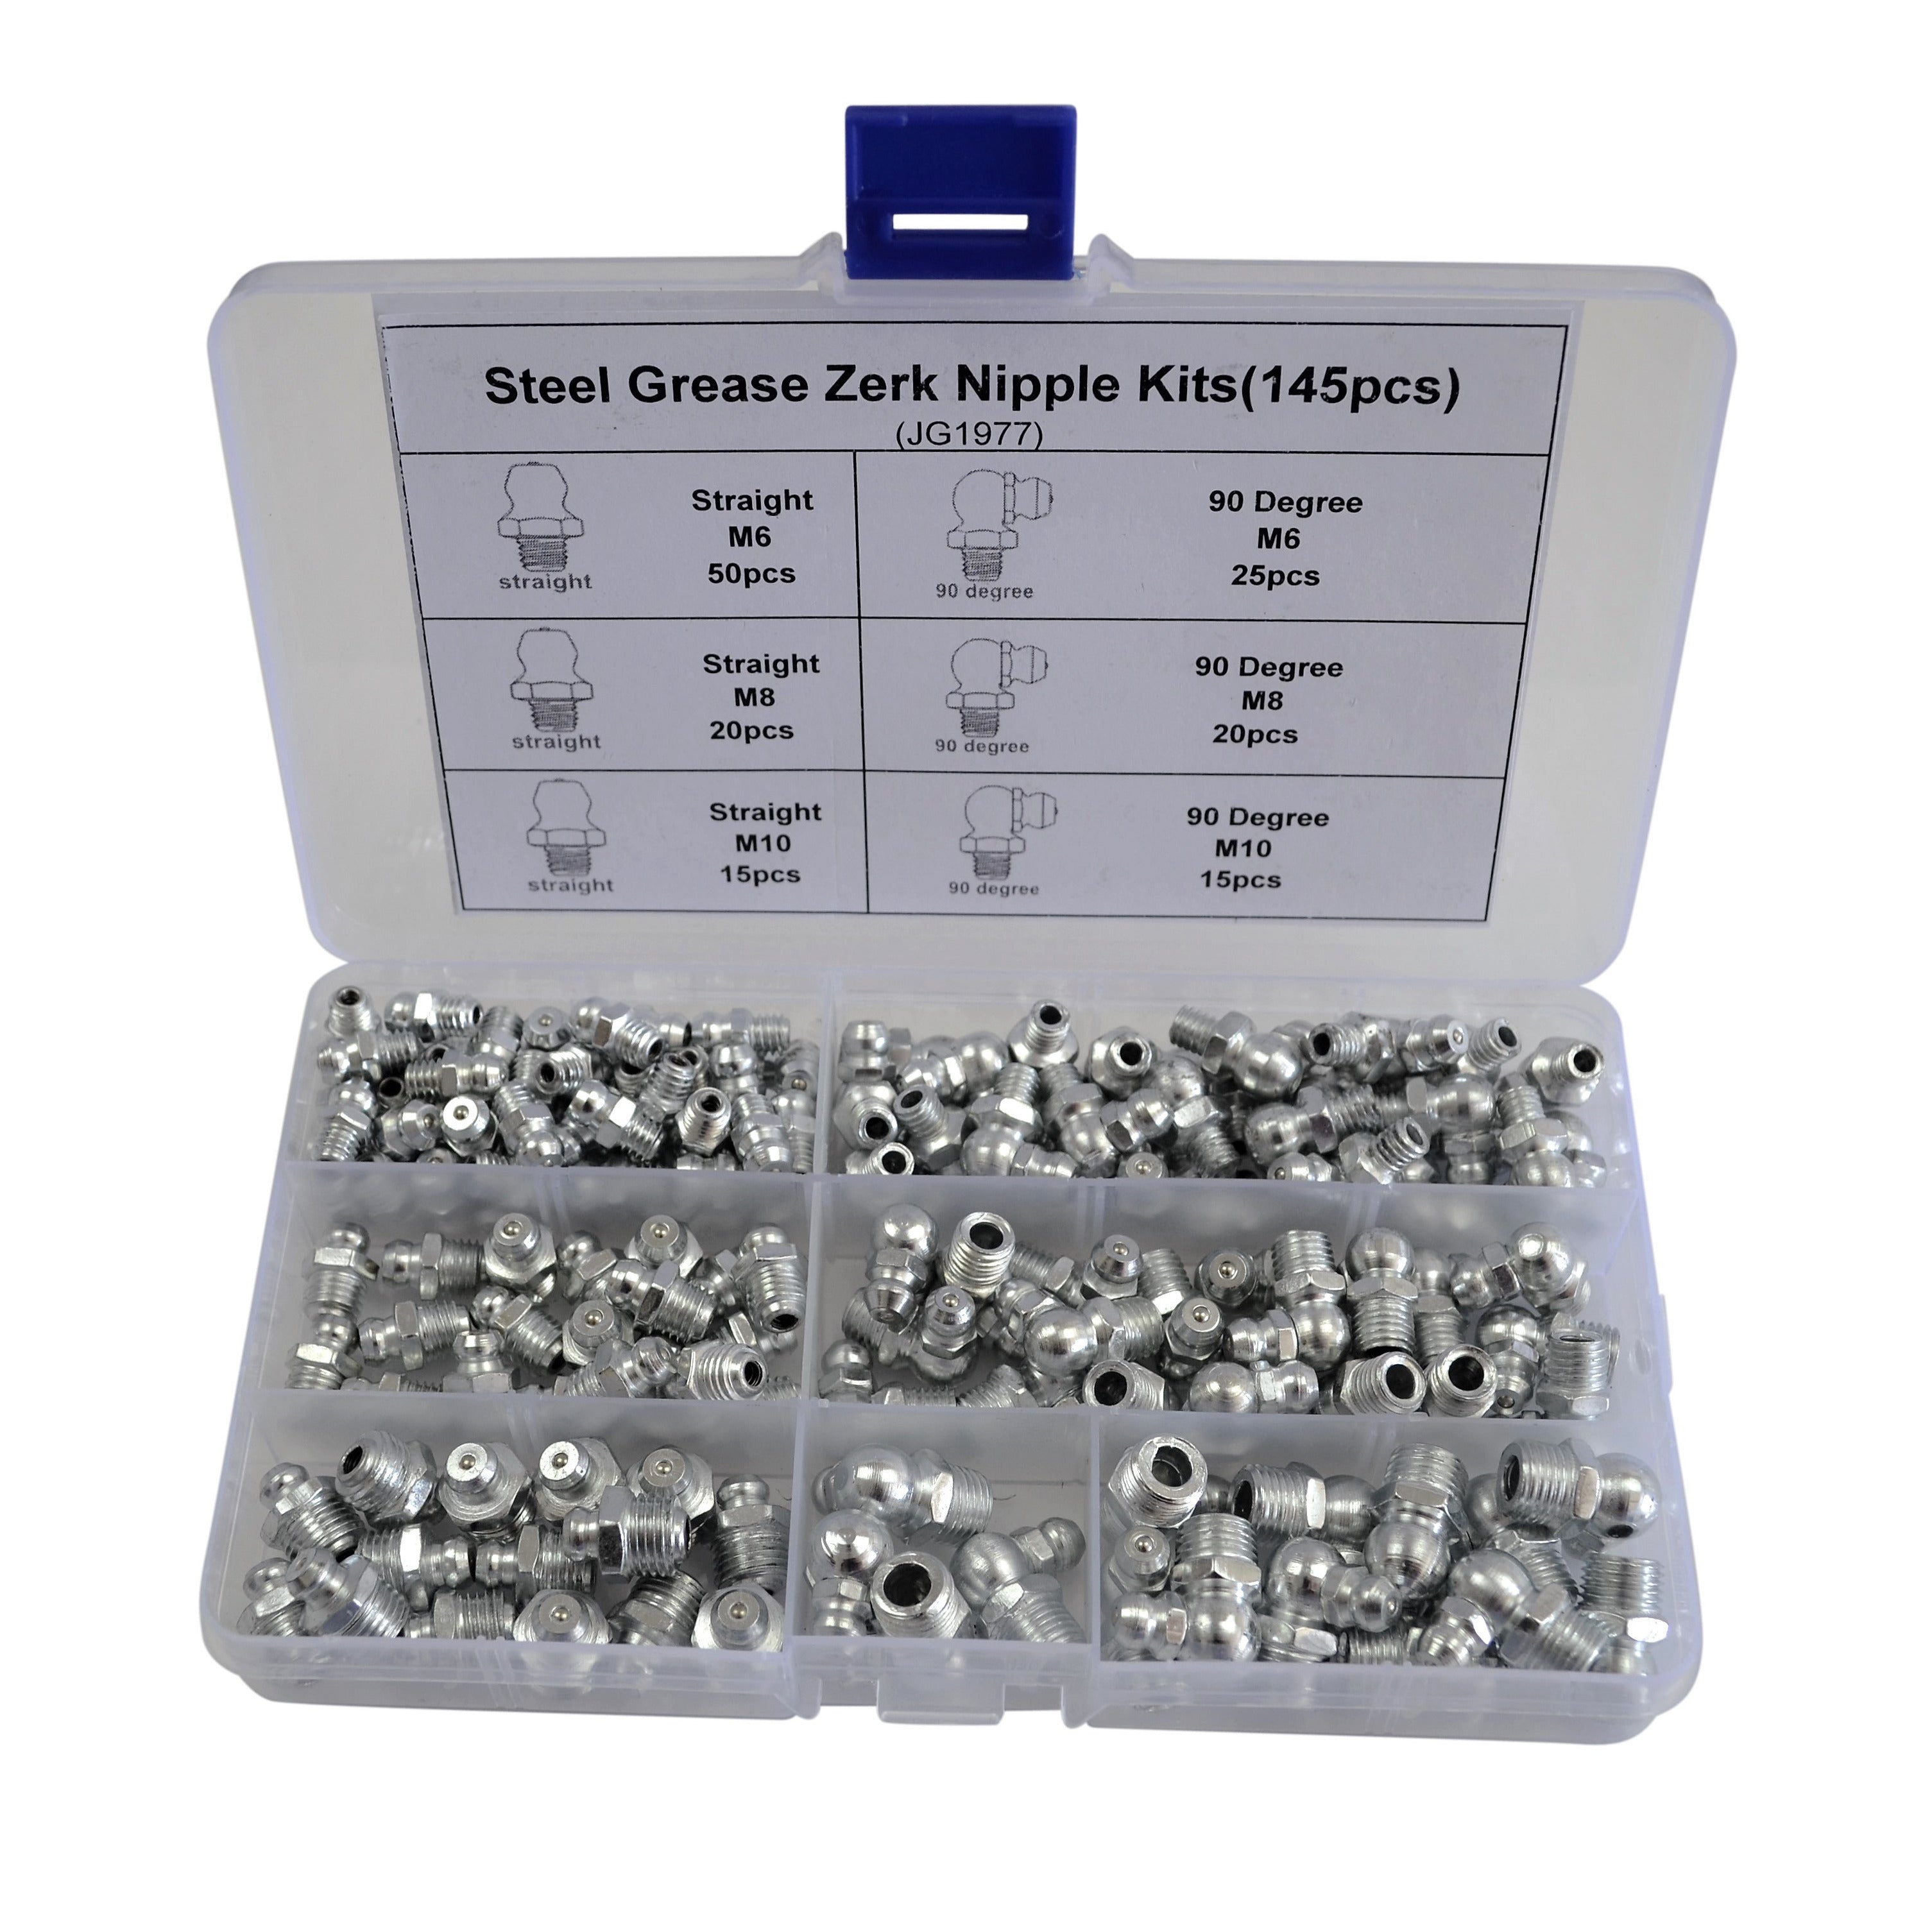 560pc grease nipples steel brass fittings imperial metric grease dust caps set accessories tool parts